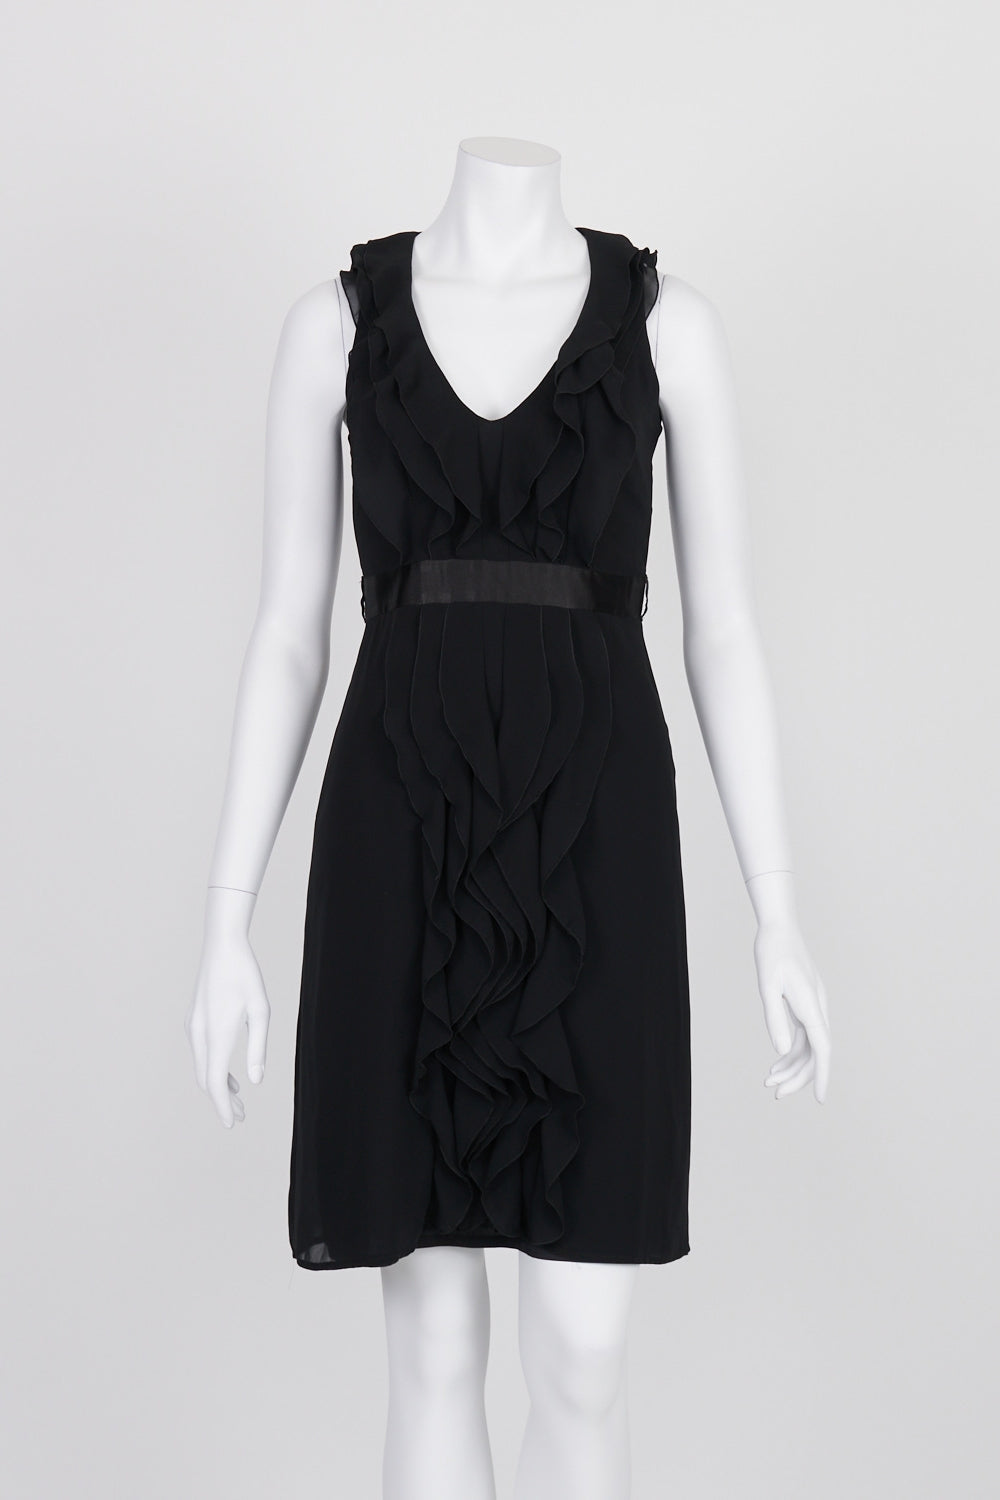 Review Black Ruffle Front Sleeveless Cocktail Dress 6